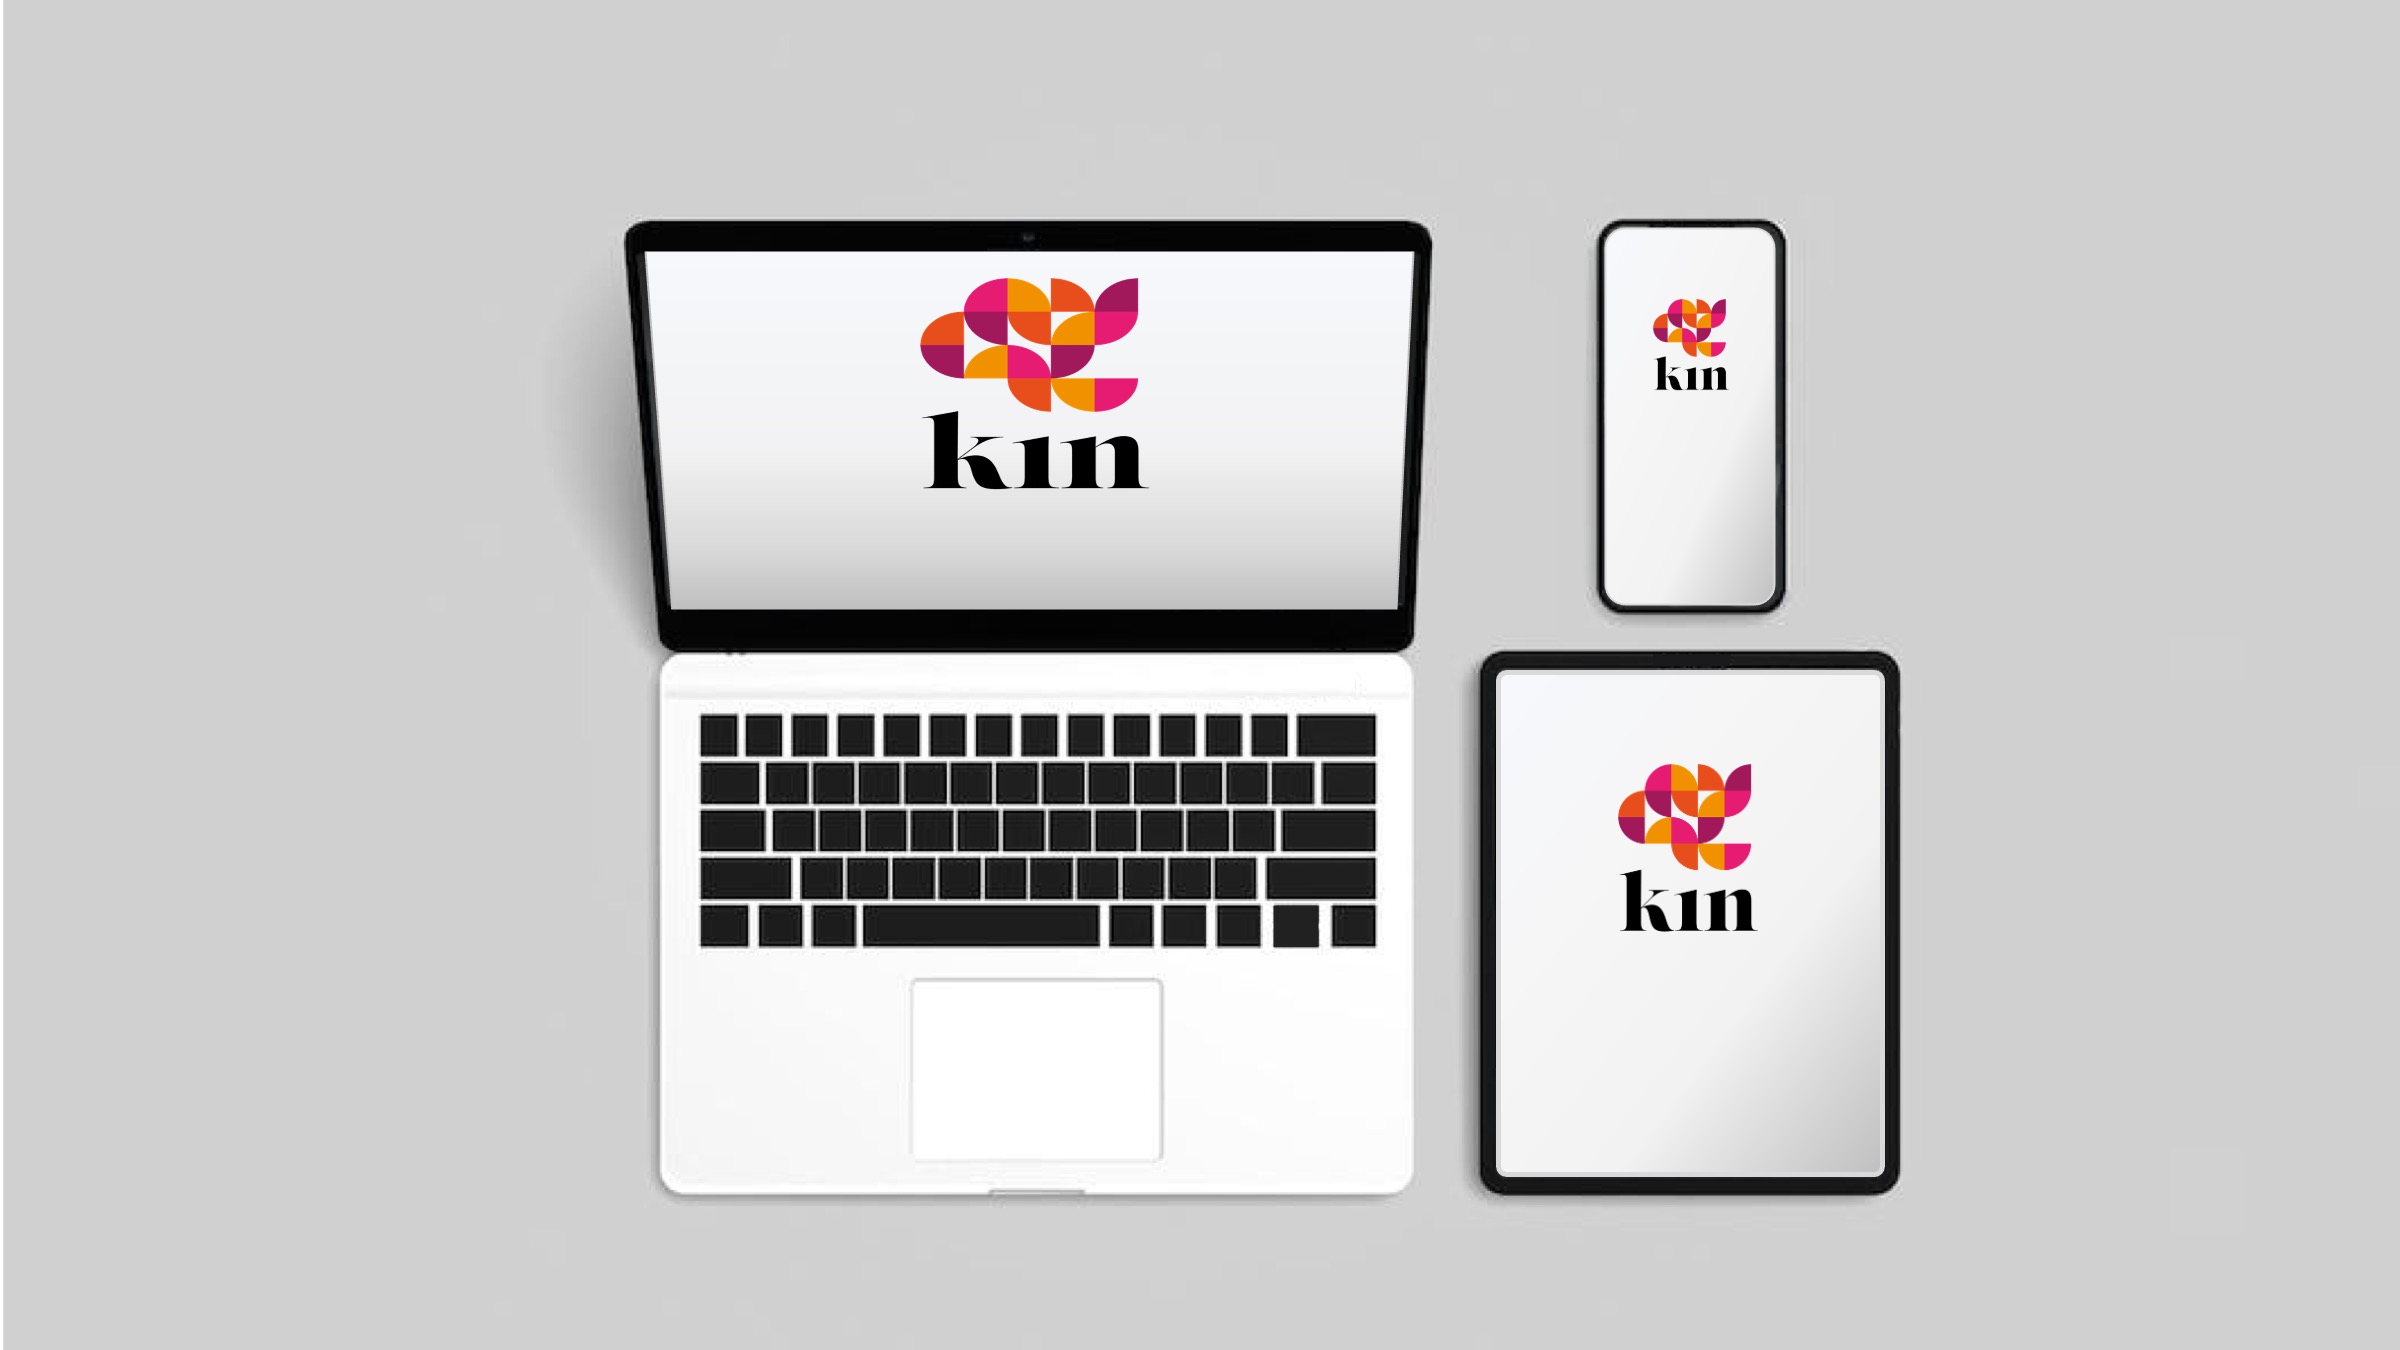 Kin works on any device